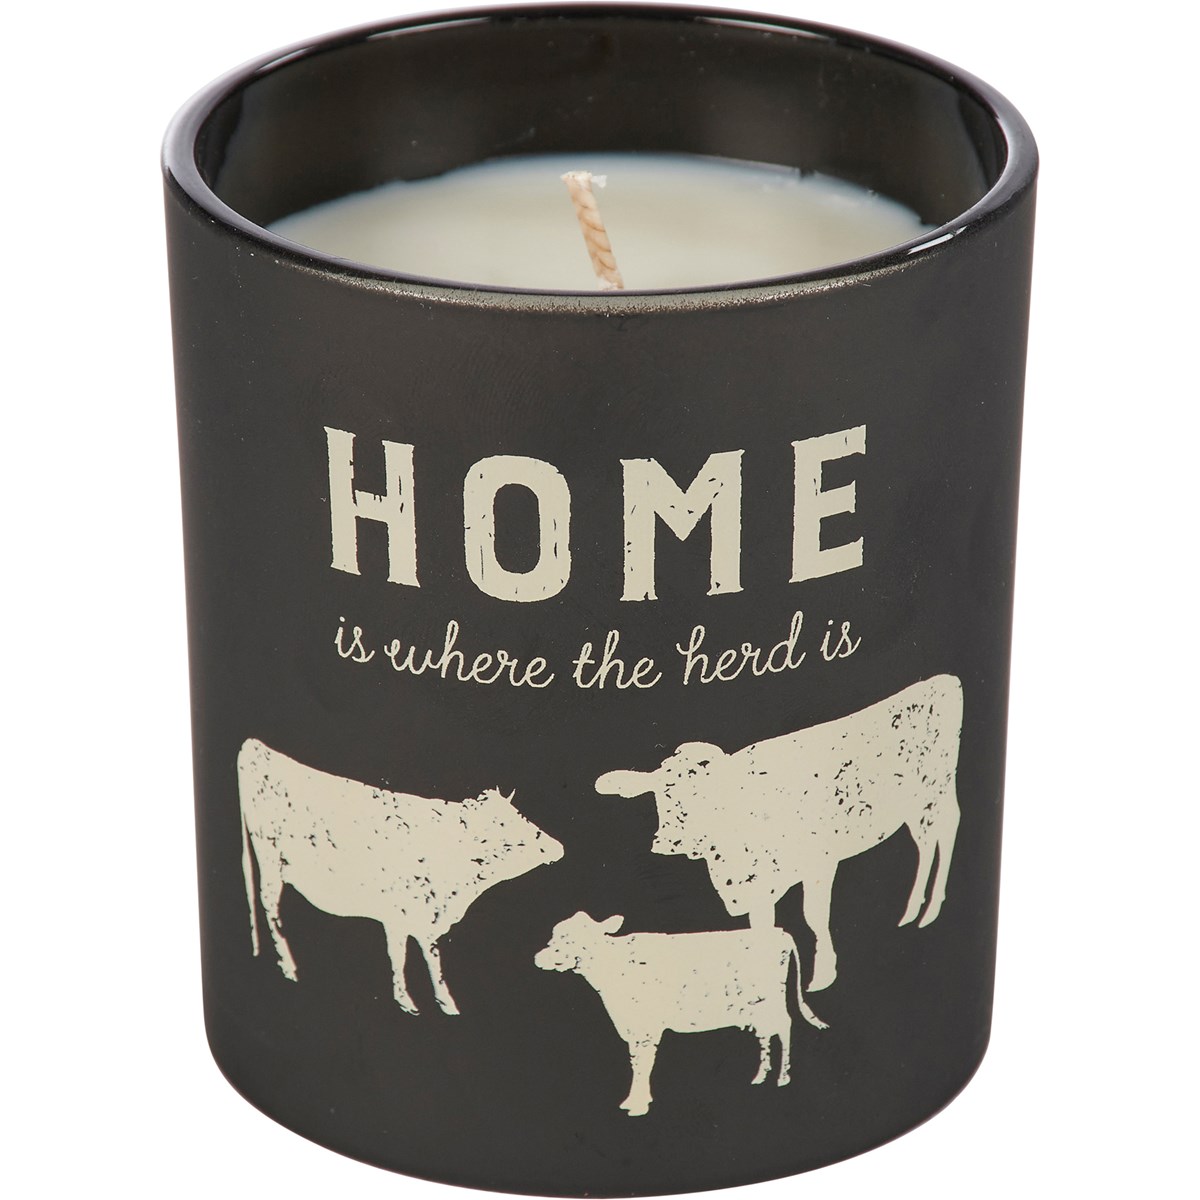 Home Is Where The Herd Is Candle - Soy Wax, Glass, Cotton